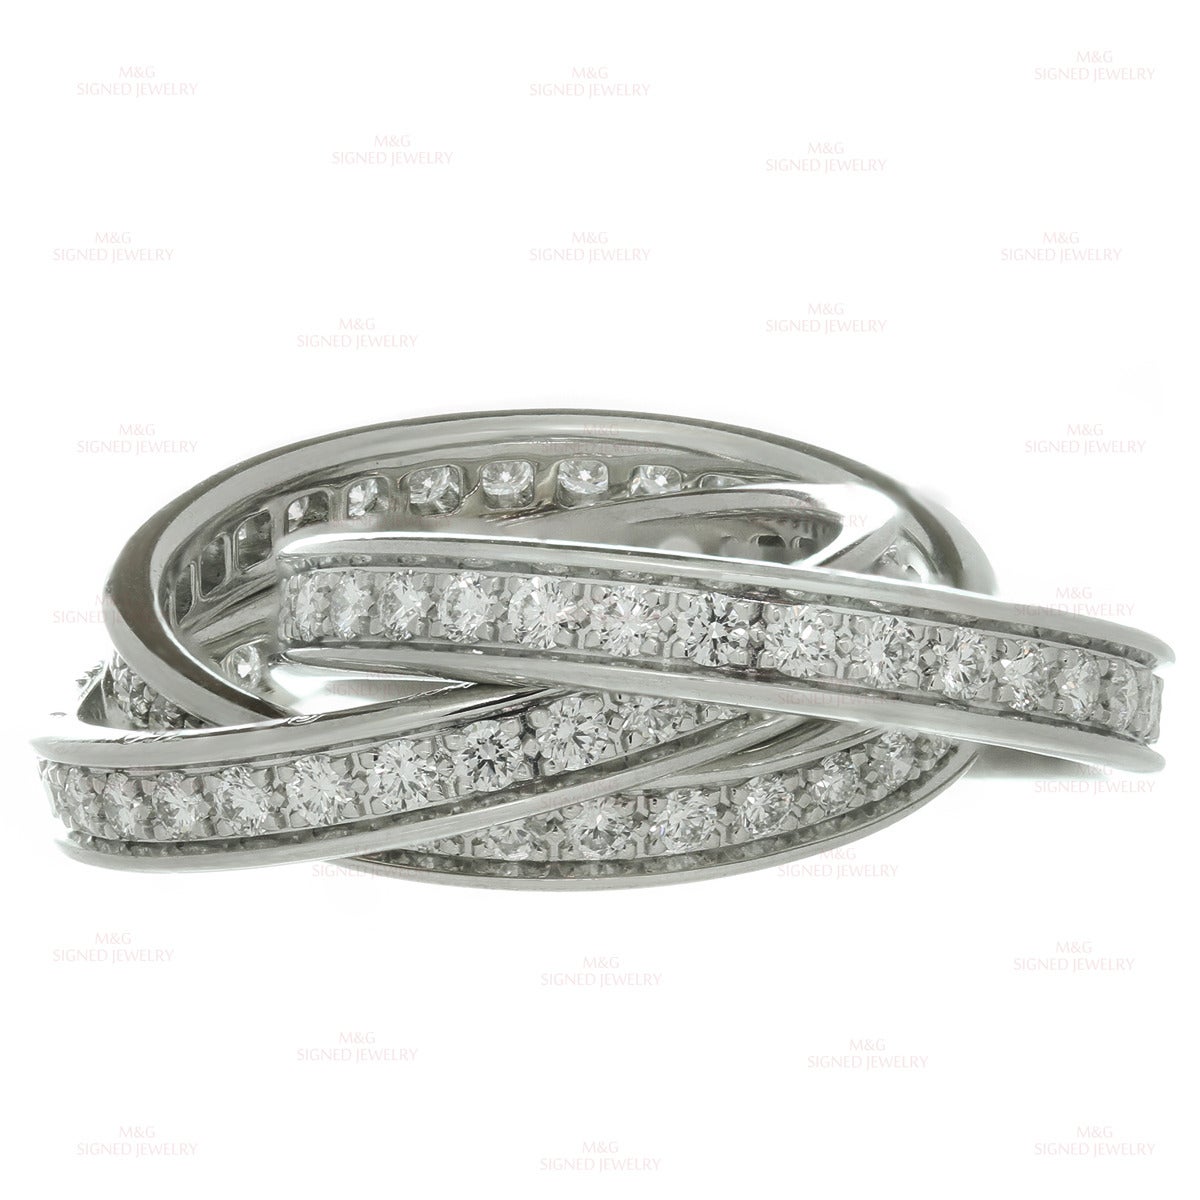 This modern Cartier ring from the iconic Trinity collection features 3 interconnected bands crafted in 18k white gold and stunningly set with brilliant-cut round E-F VVS1-VVS2 diamonds of an estimated 2.0 carats. 

Measurements: 0.27